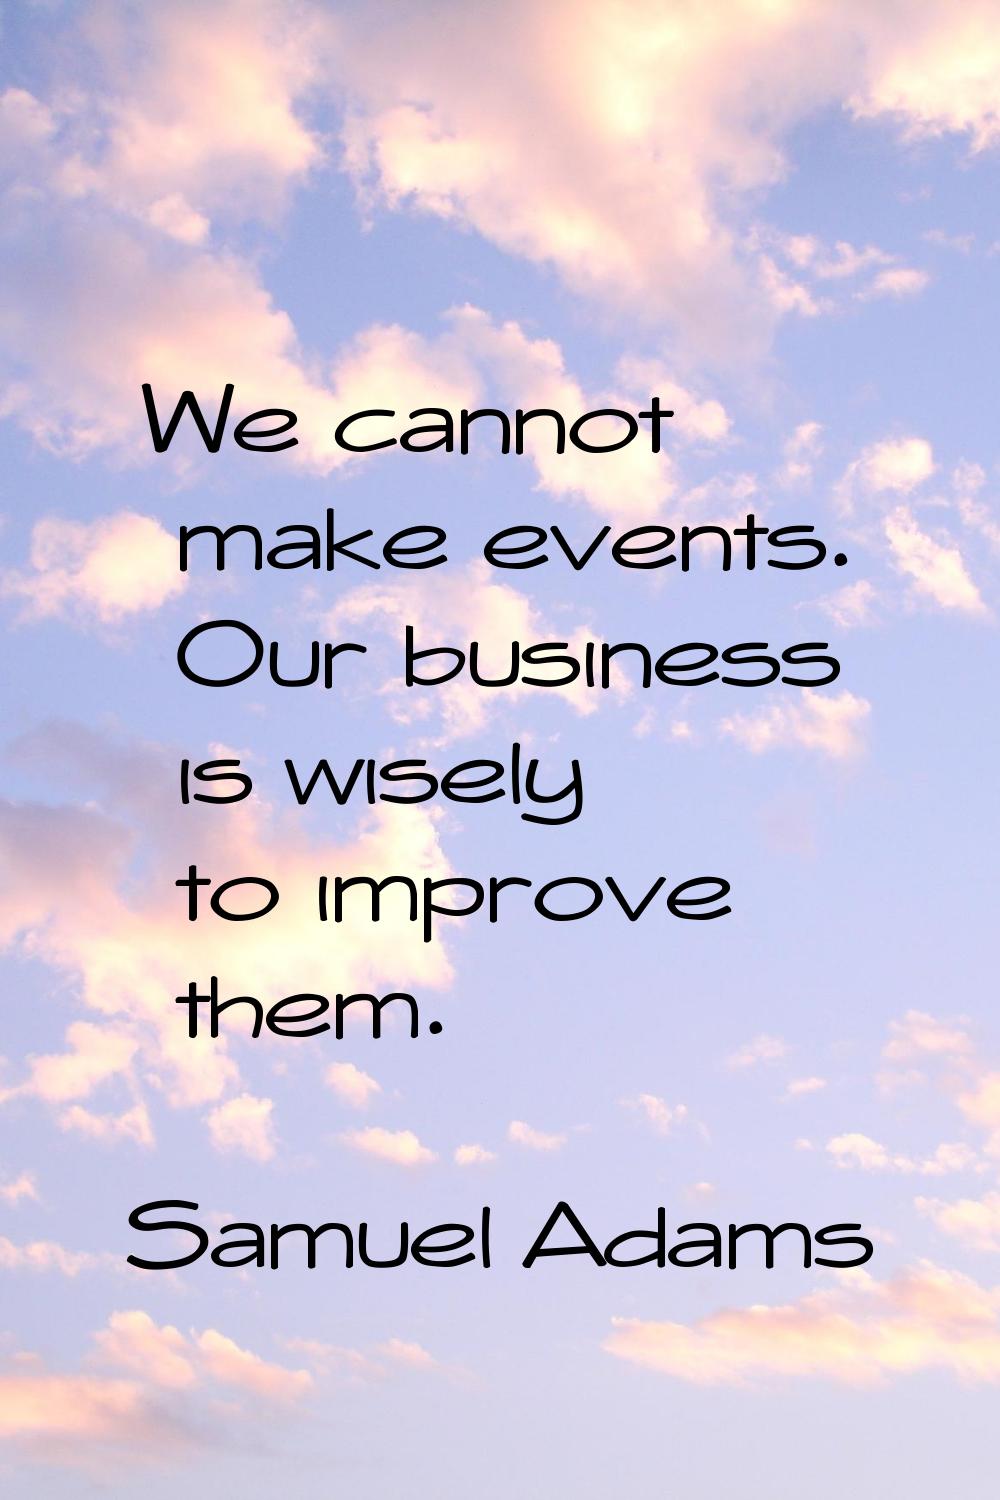 We cannot make events. Our business is wisely to improve them.